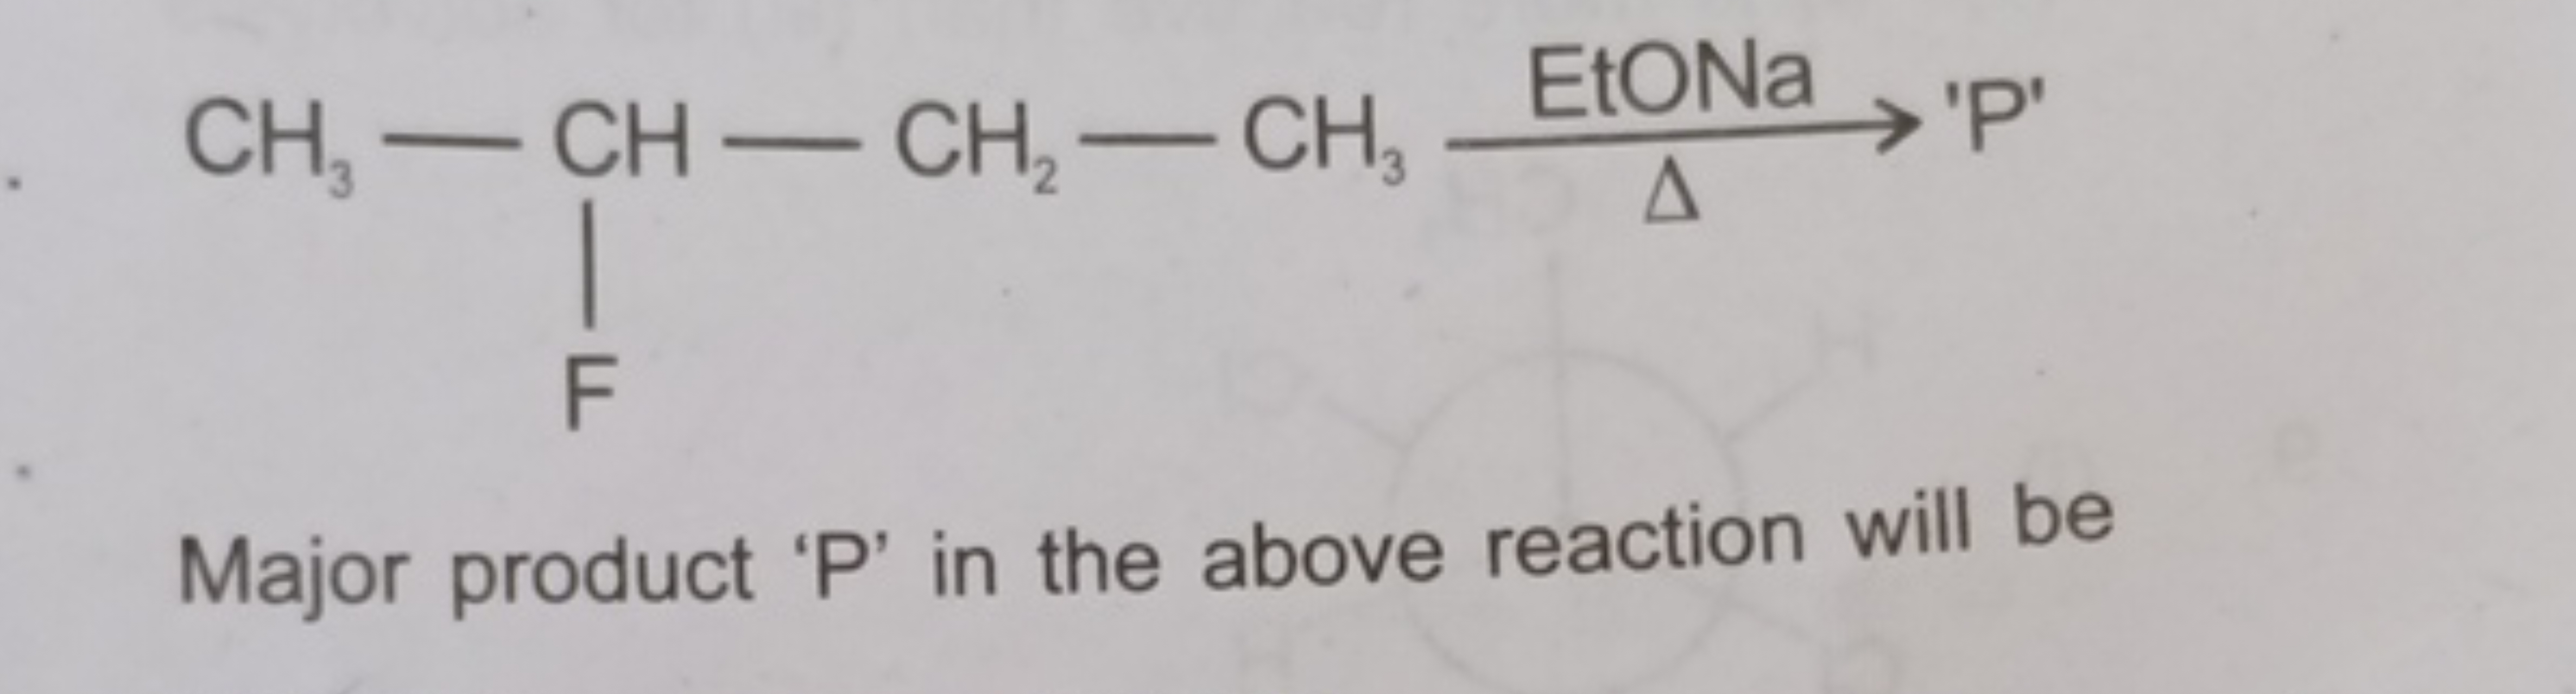 CCOC(=O)CCC(C)F
Major product ' P ' in the above reaction will be
